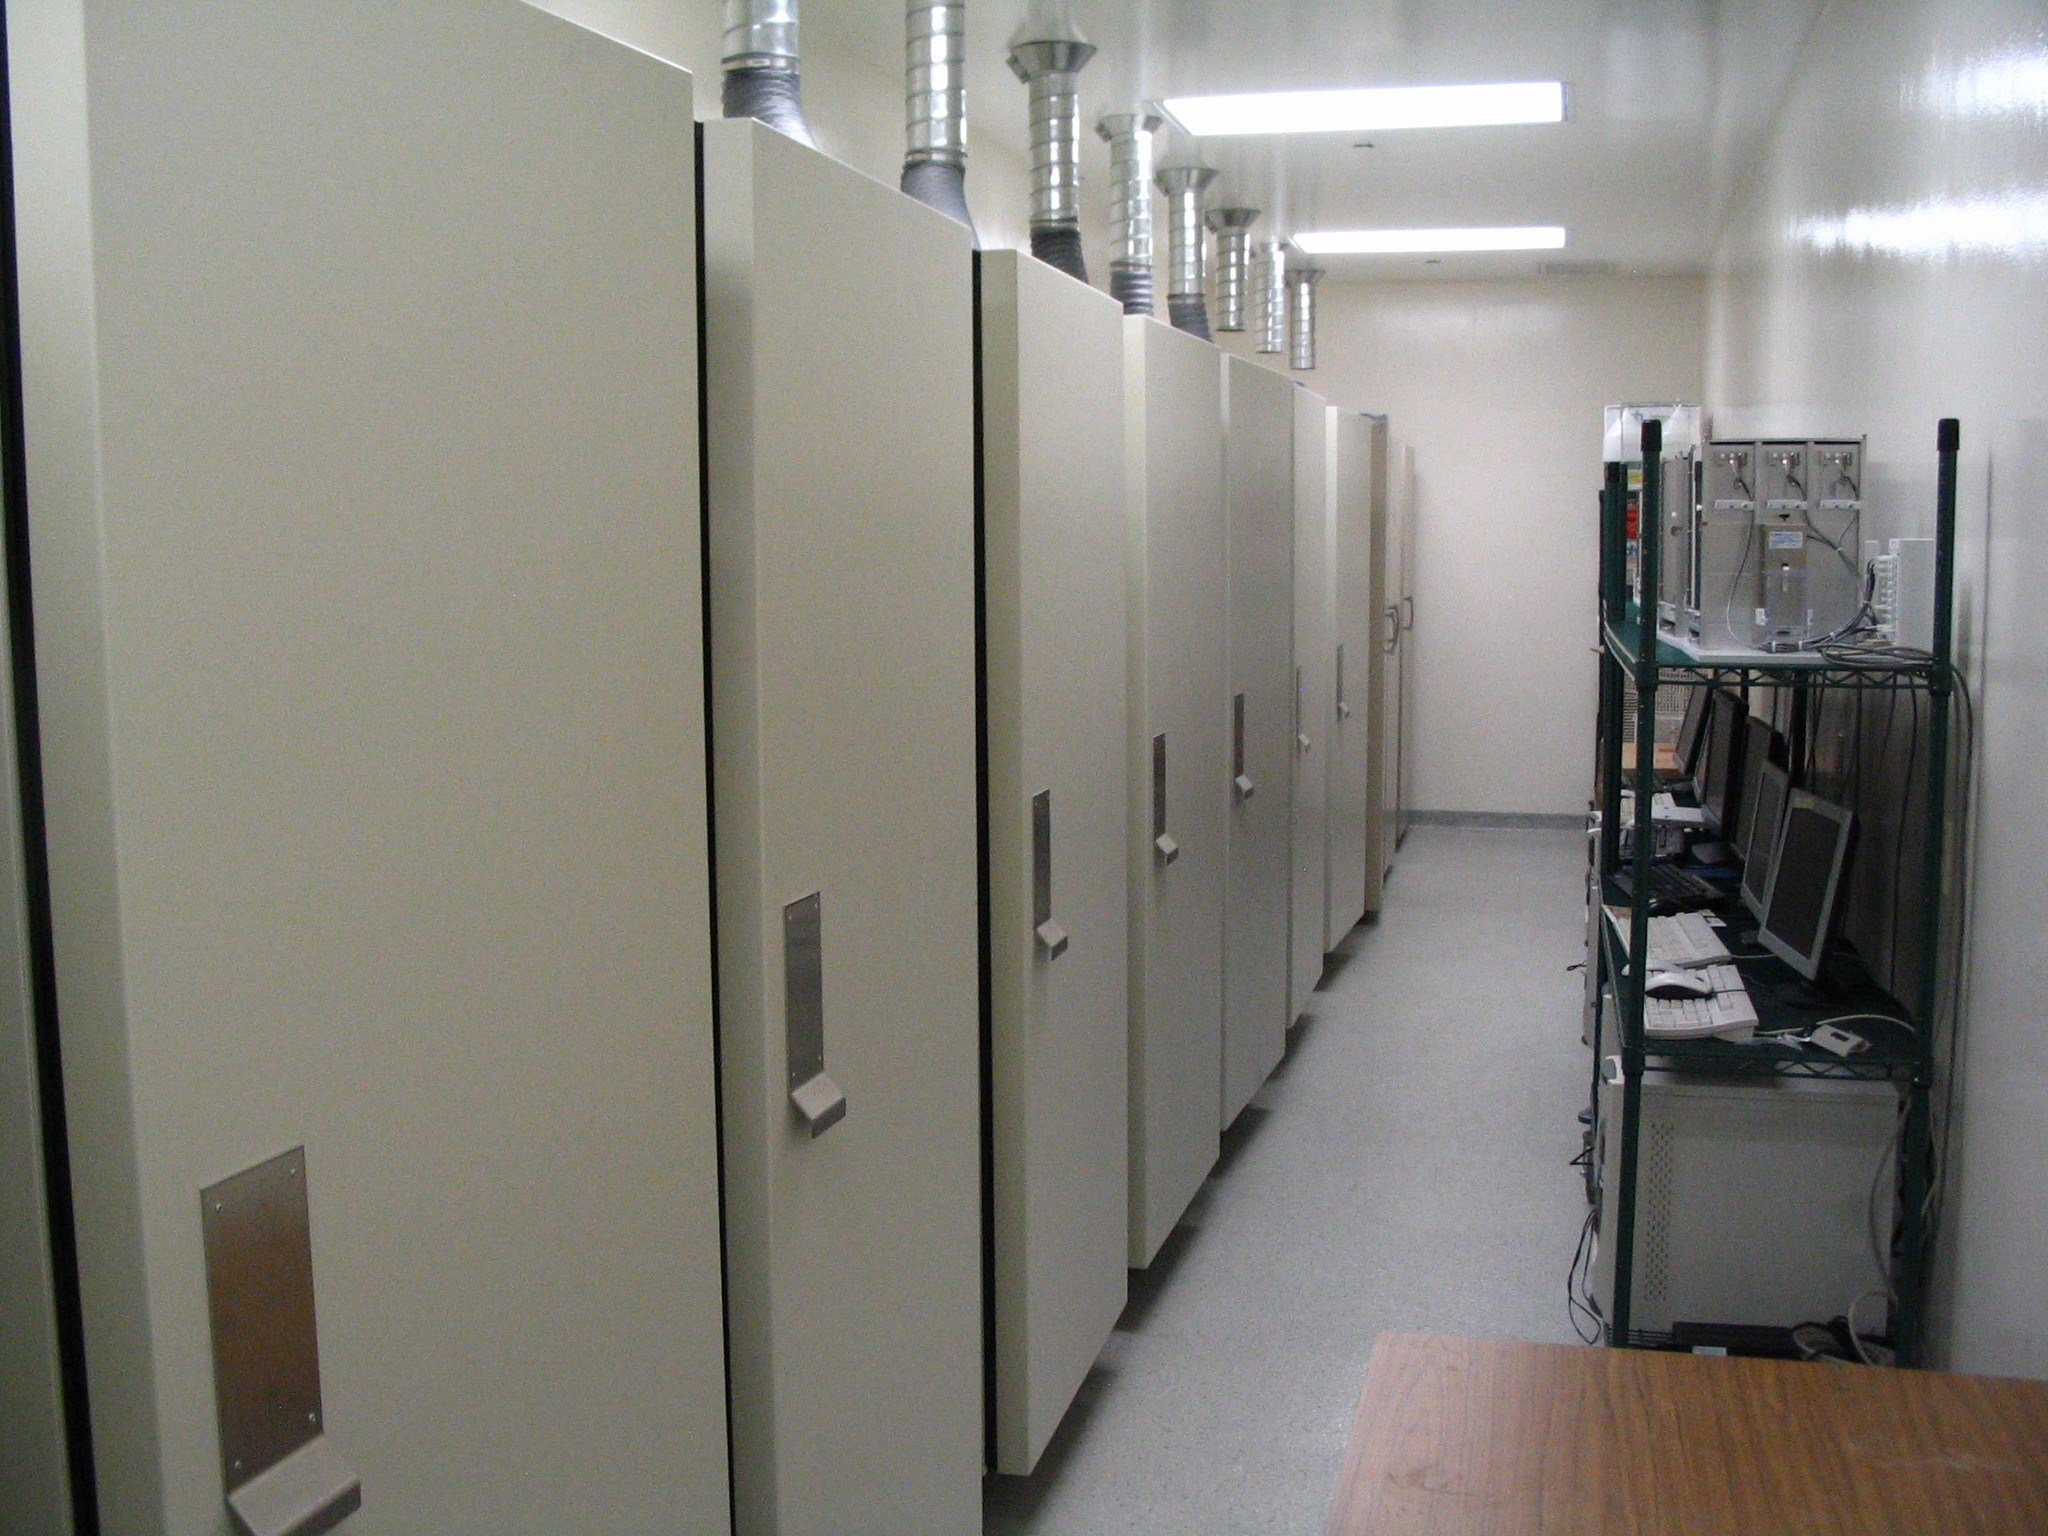 Picture of the Isolation Chambers